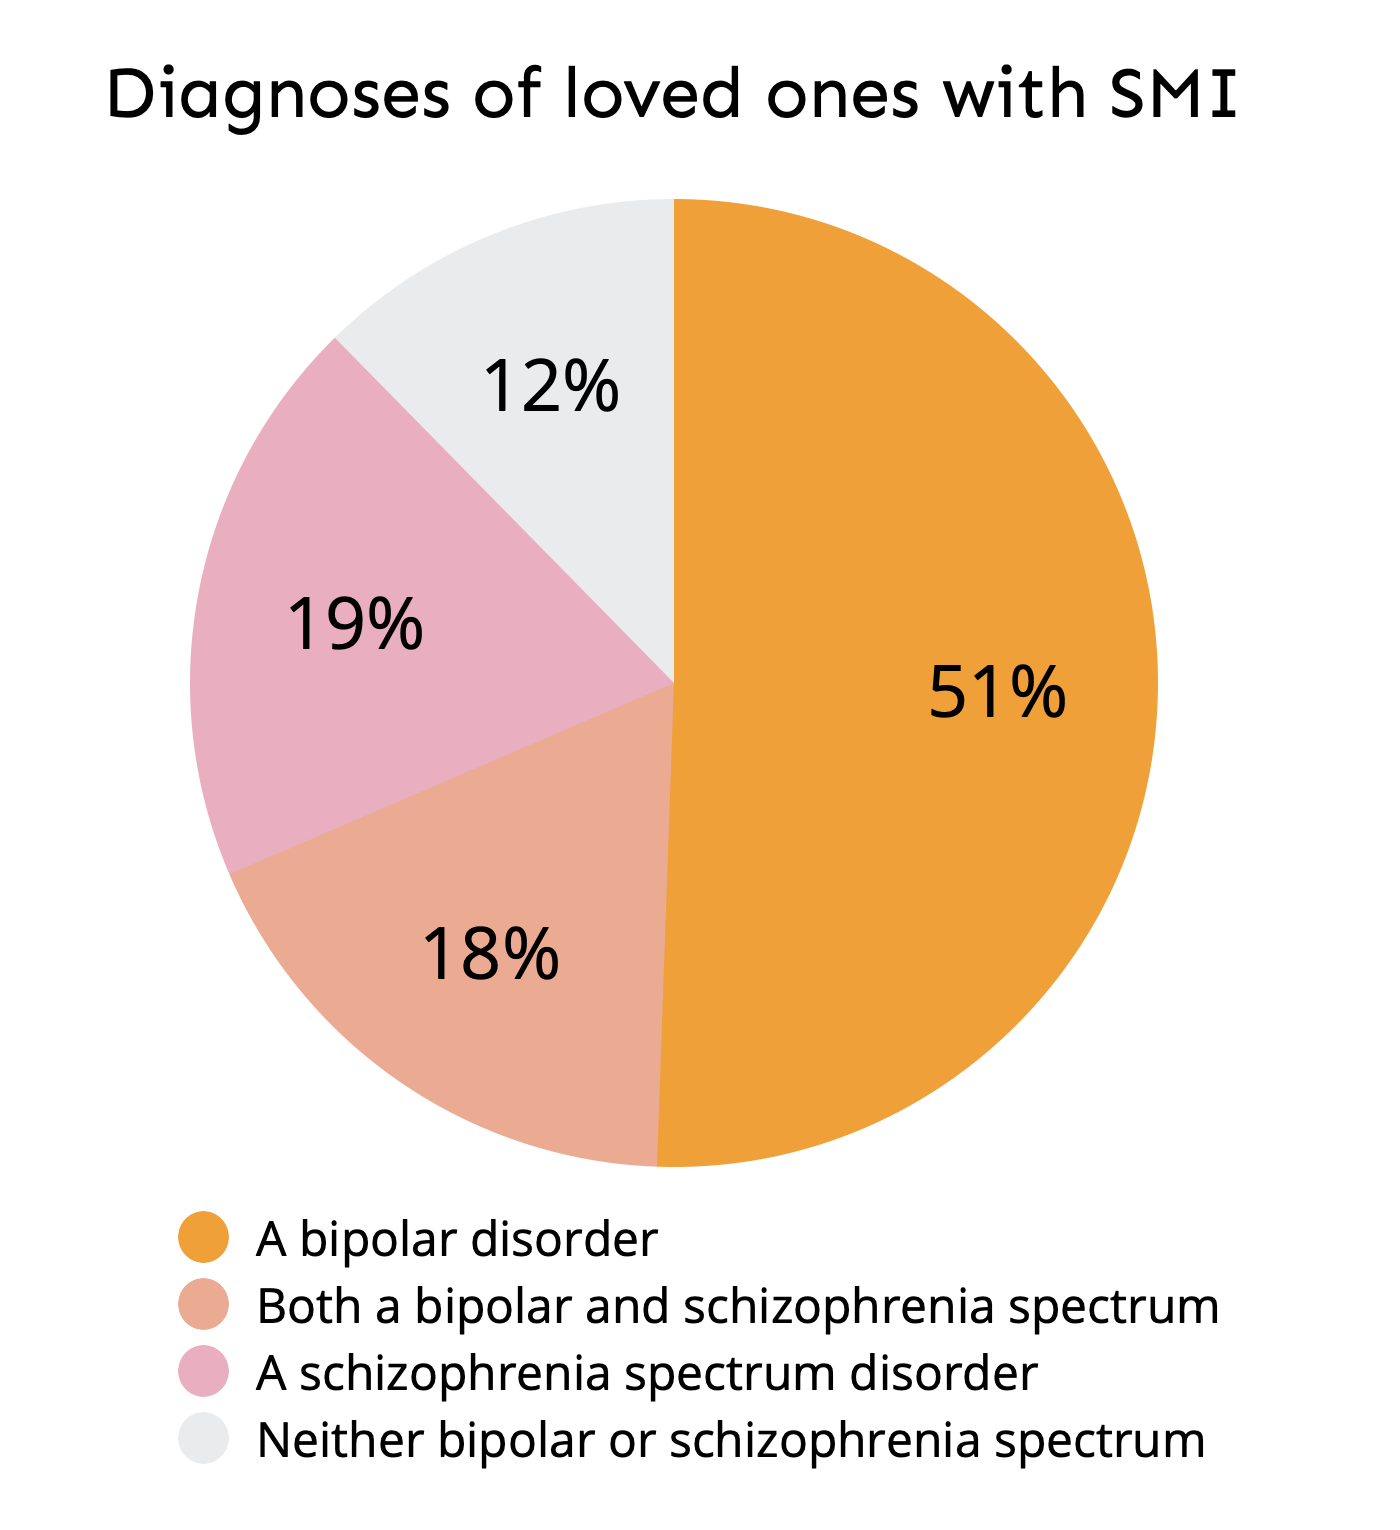 Loved one diagnoses from survey